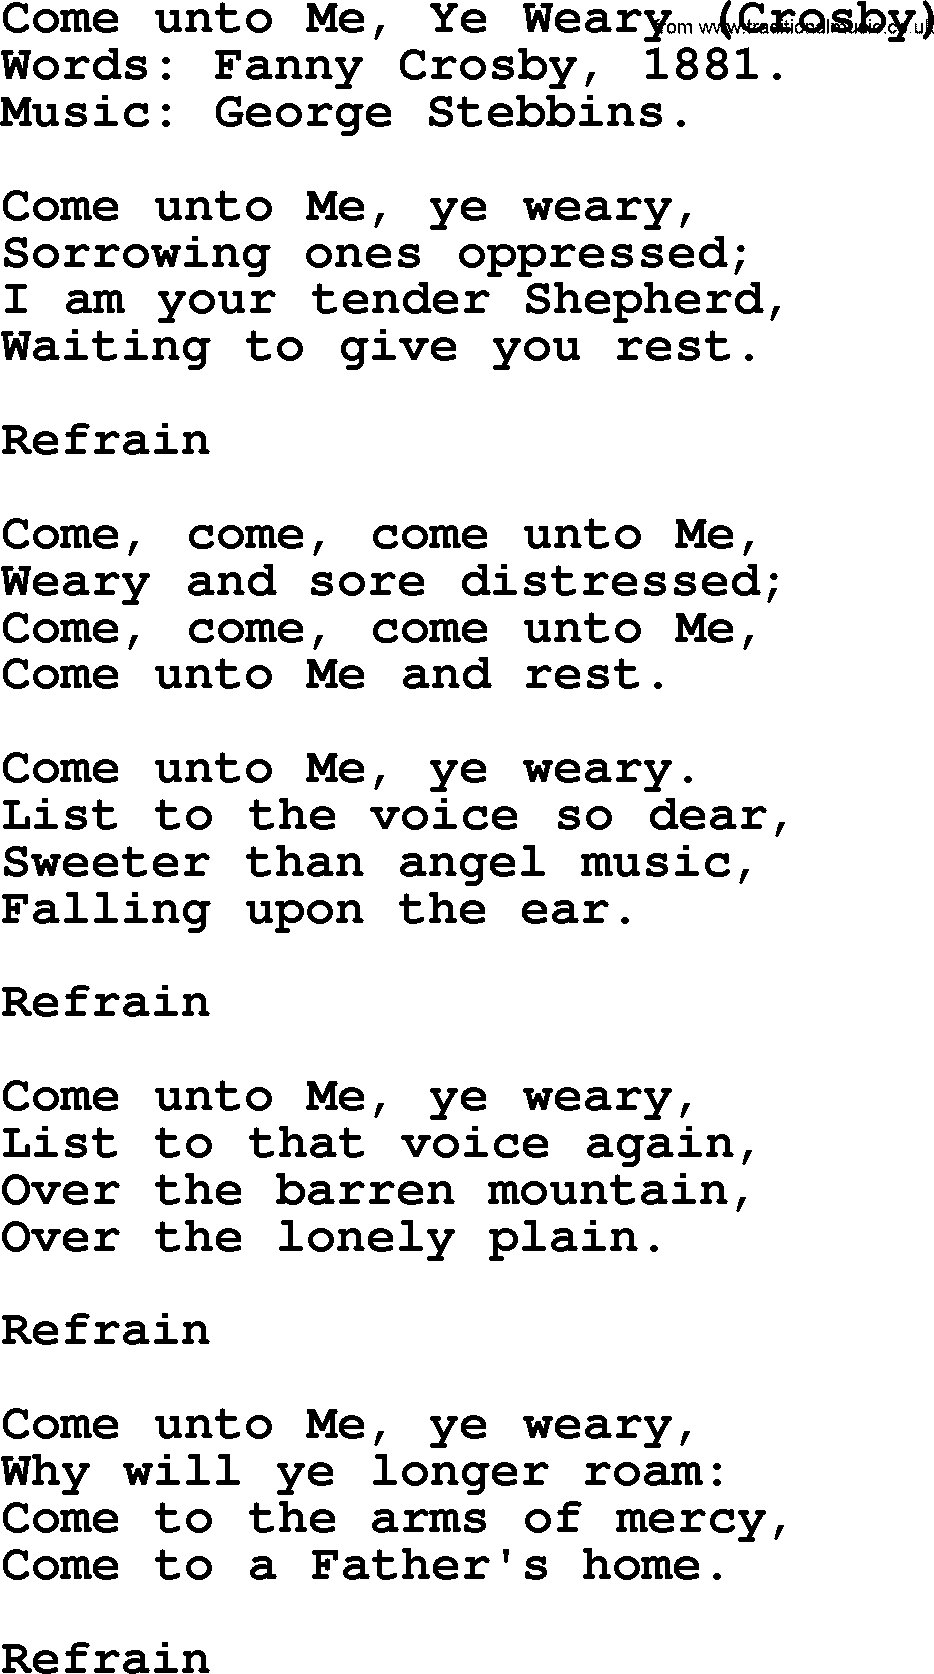 Hymns about Angels, Hymn: Come Unto Me, Ye Weary (crosby).txt lyrics with PDF